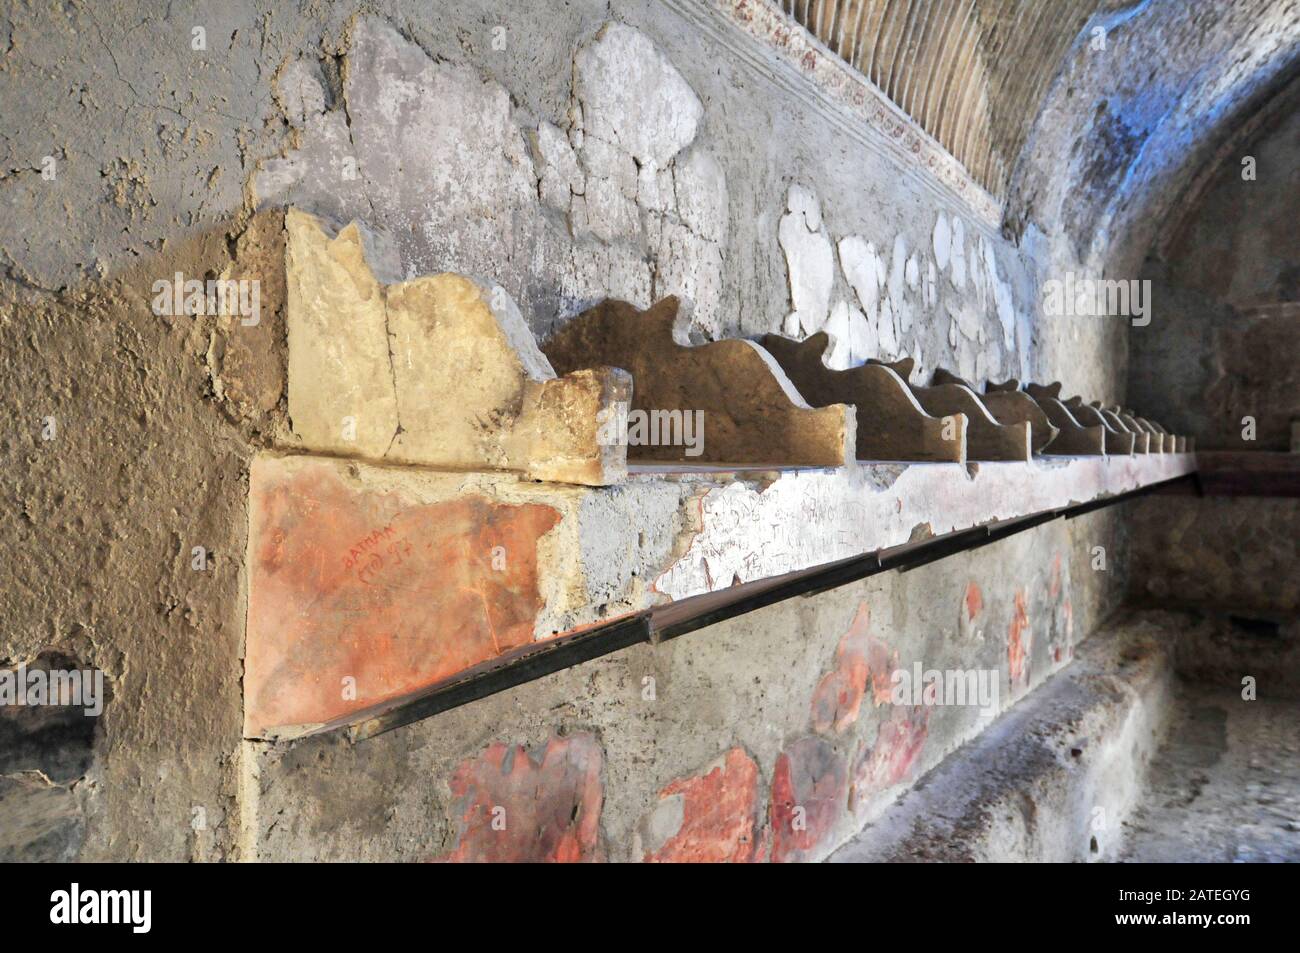 Italy, Naples, Herculaneum: Detail of Niches for storing Street Clothes in the Roman Baths Changing Room Stock Photo